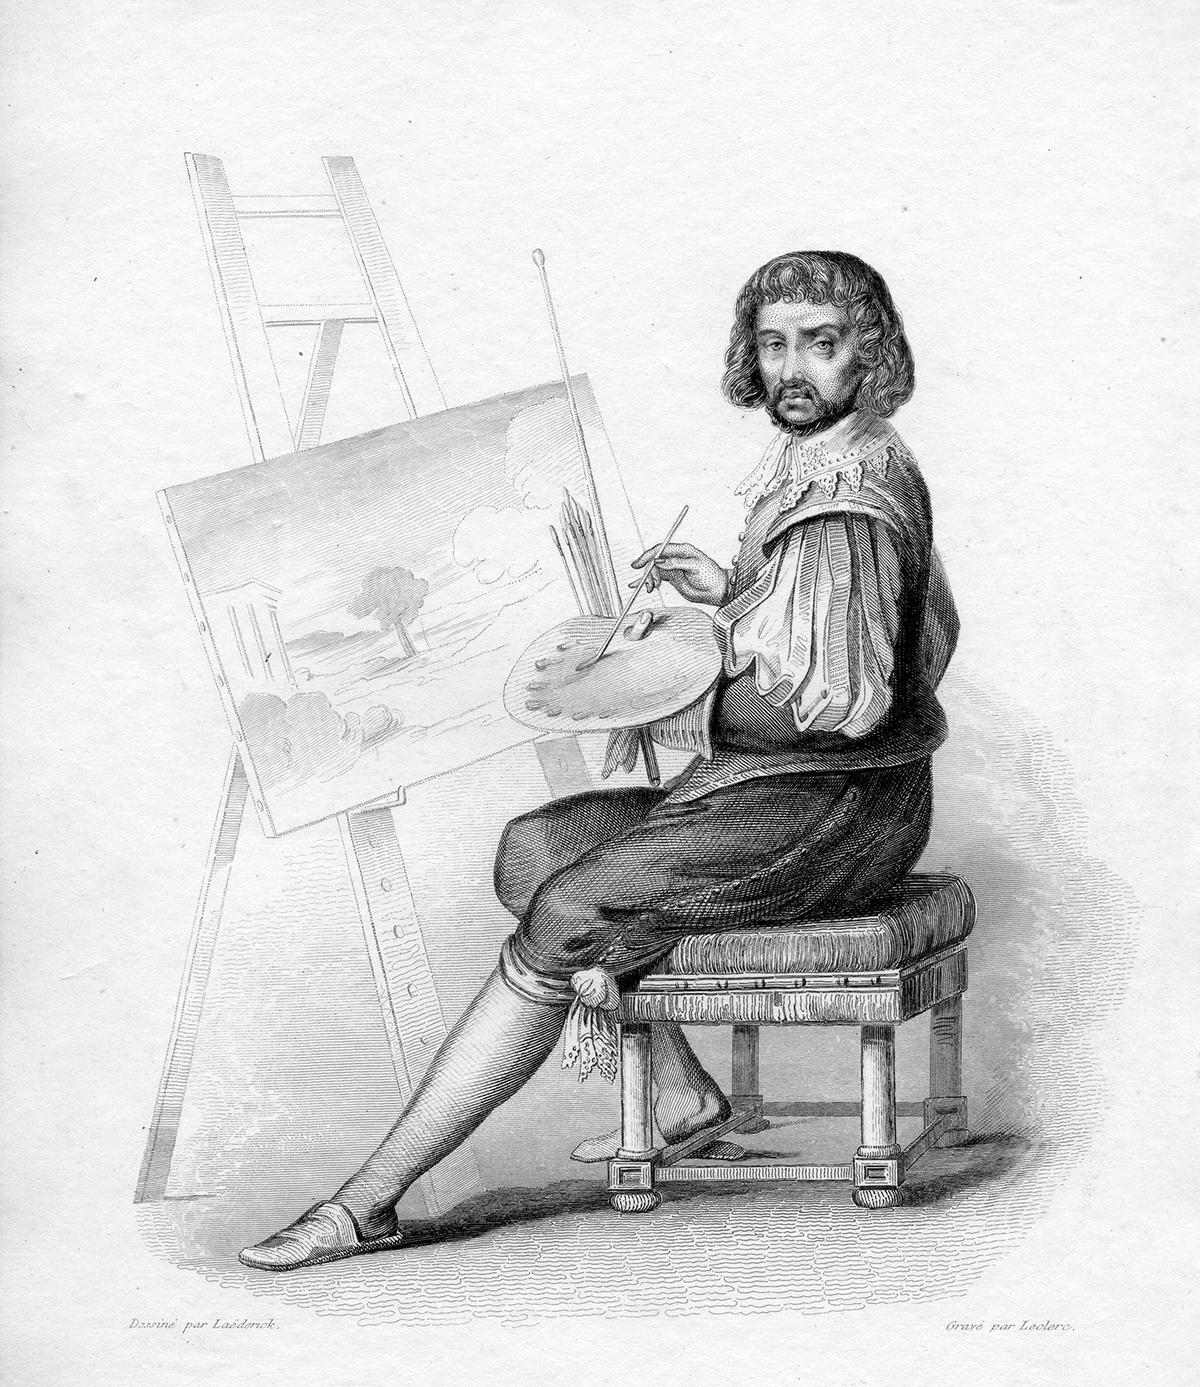 A drawing of the landscape painter Claude Lorrain by Laederick and engraved by Leclerc. (Public Domain)